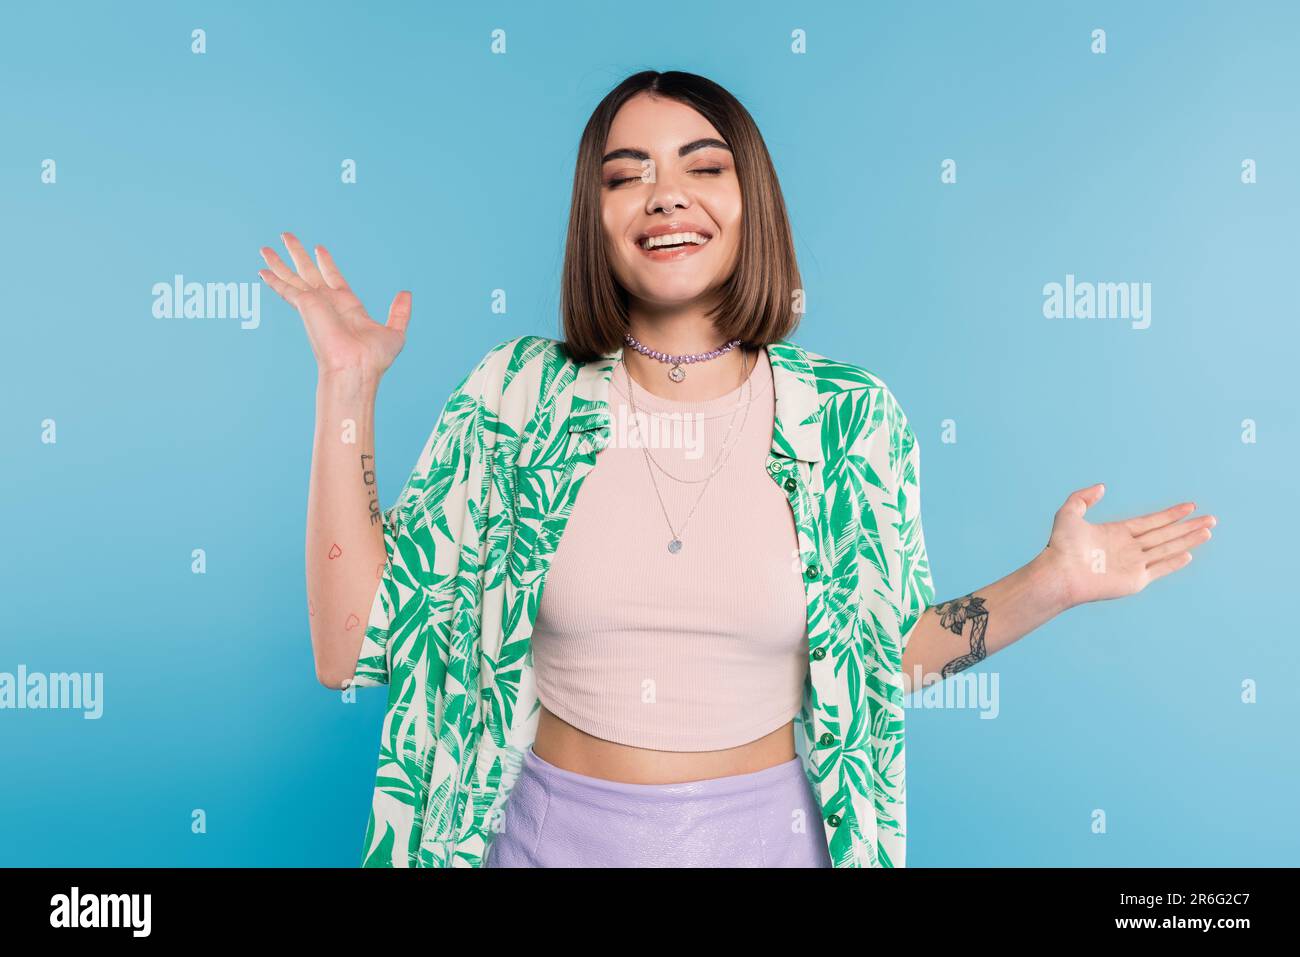 tattooed young woman with short brunette hair wearing shirt with palm tree print, smiling with closed eyes and gesturing with hands on blue background Stock Photo